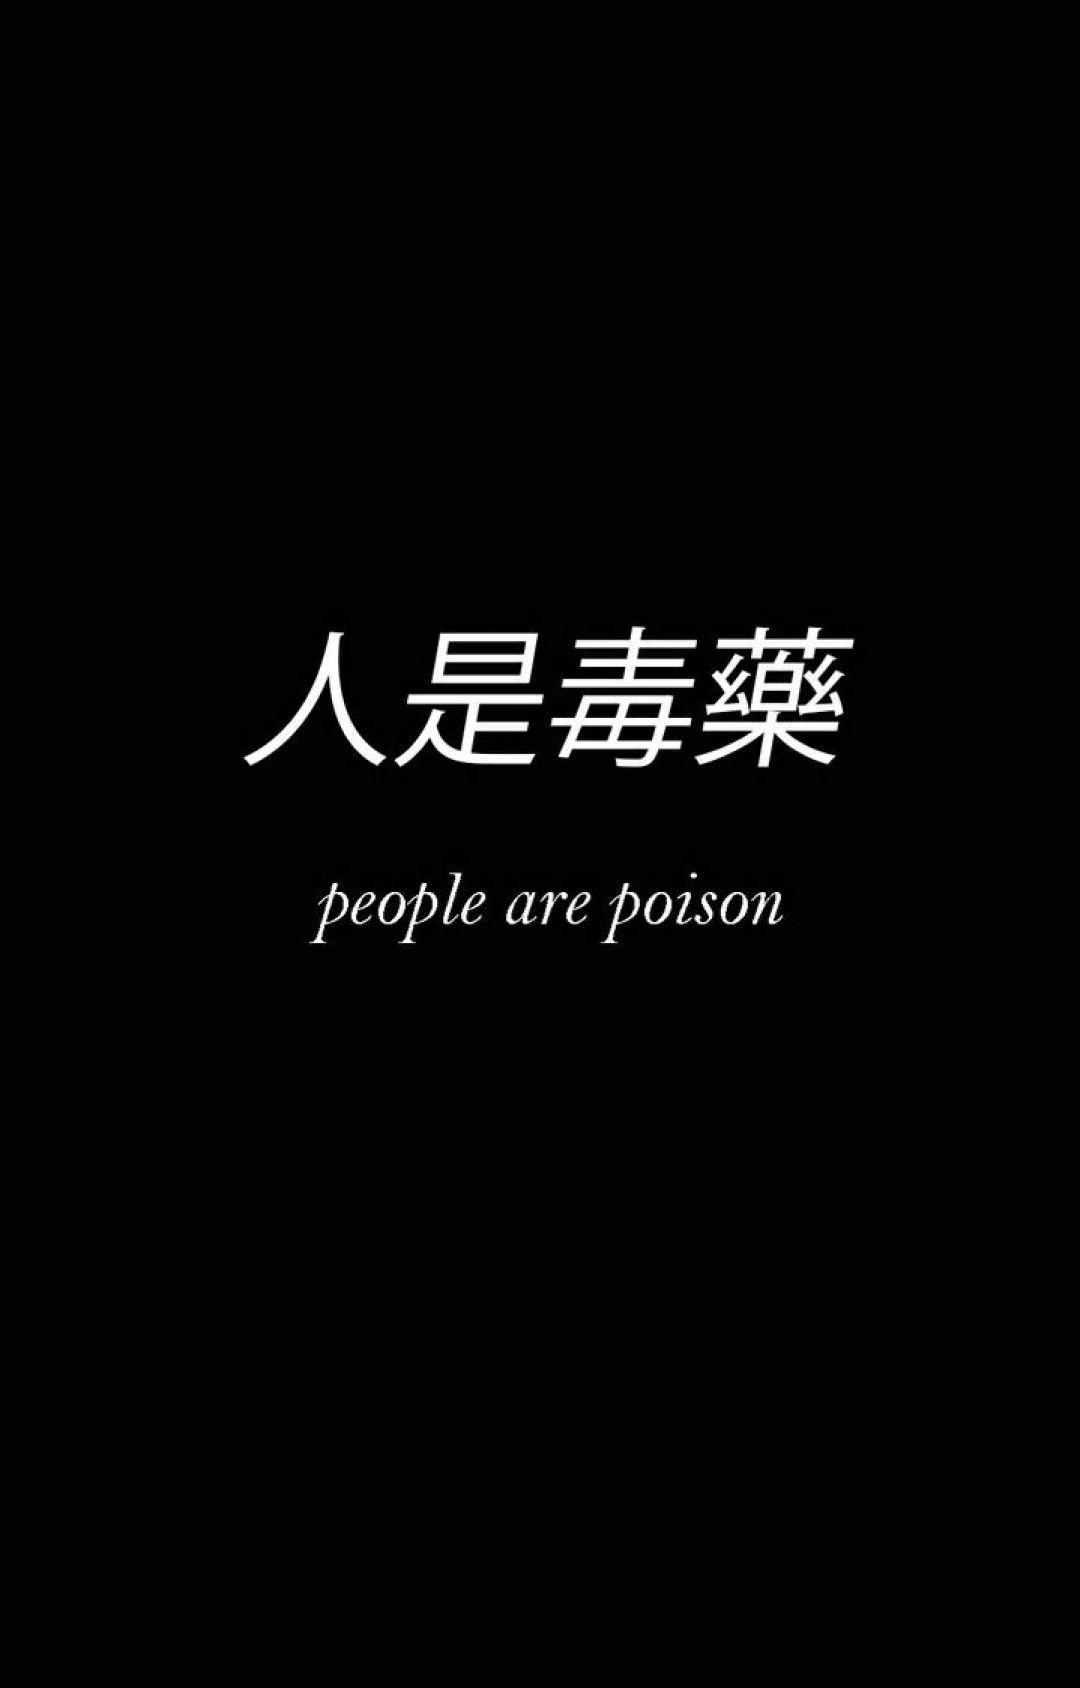 Japanese Aesthetic Quotes, iPhone, Desktop HD